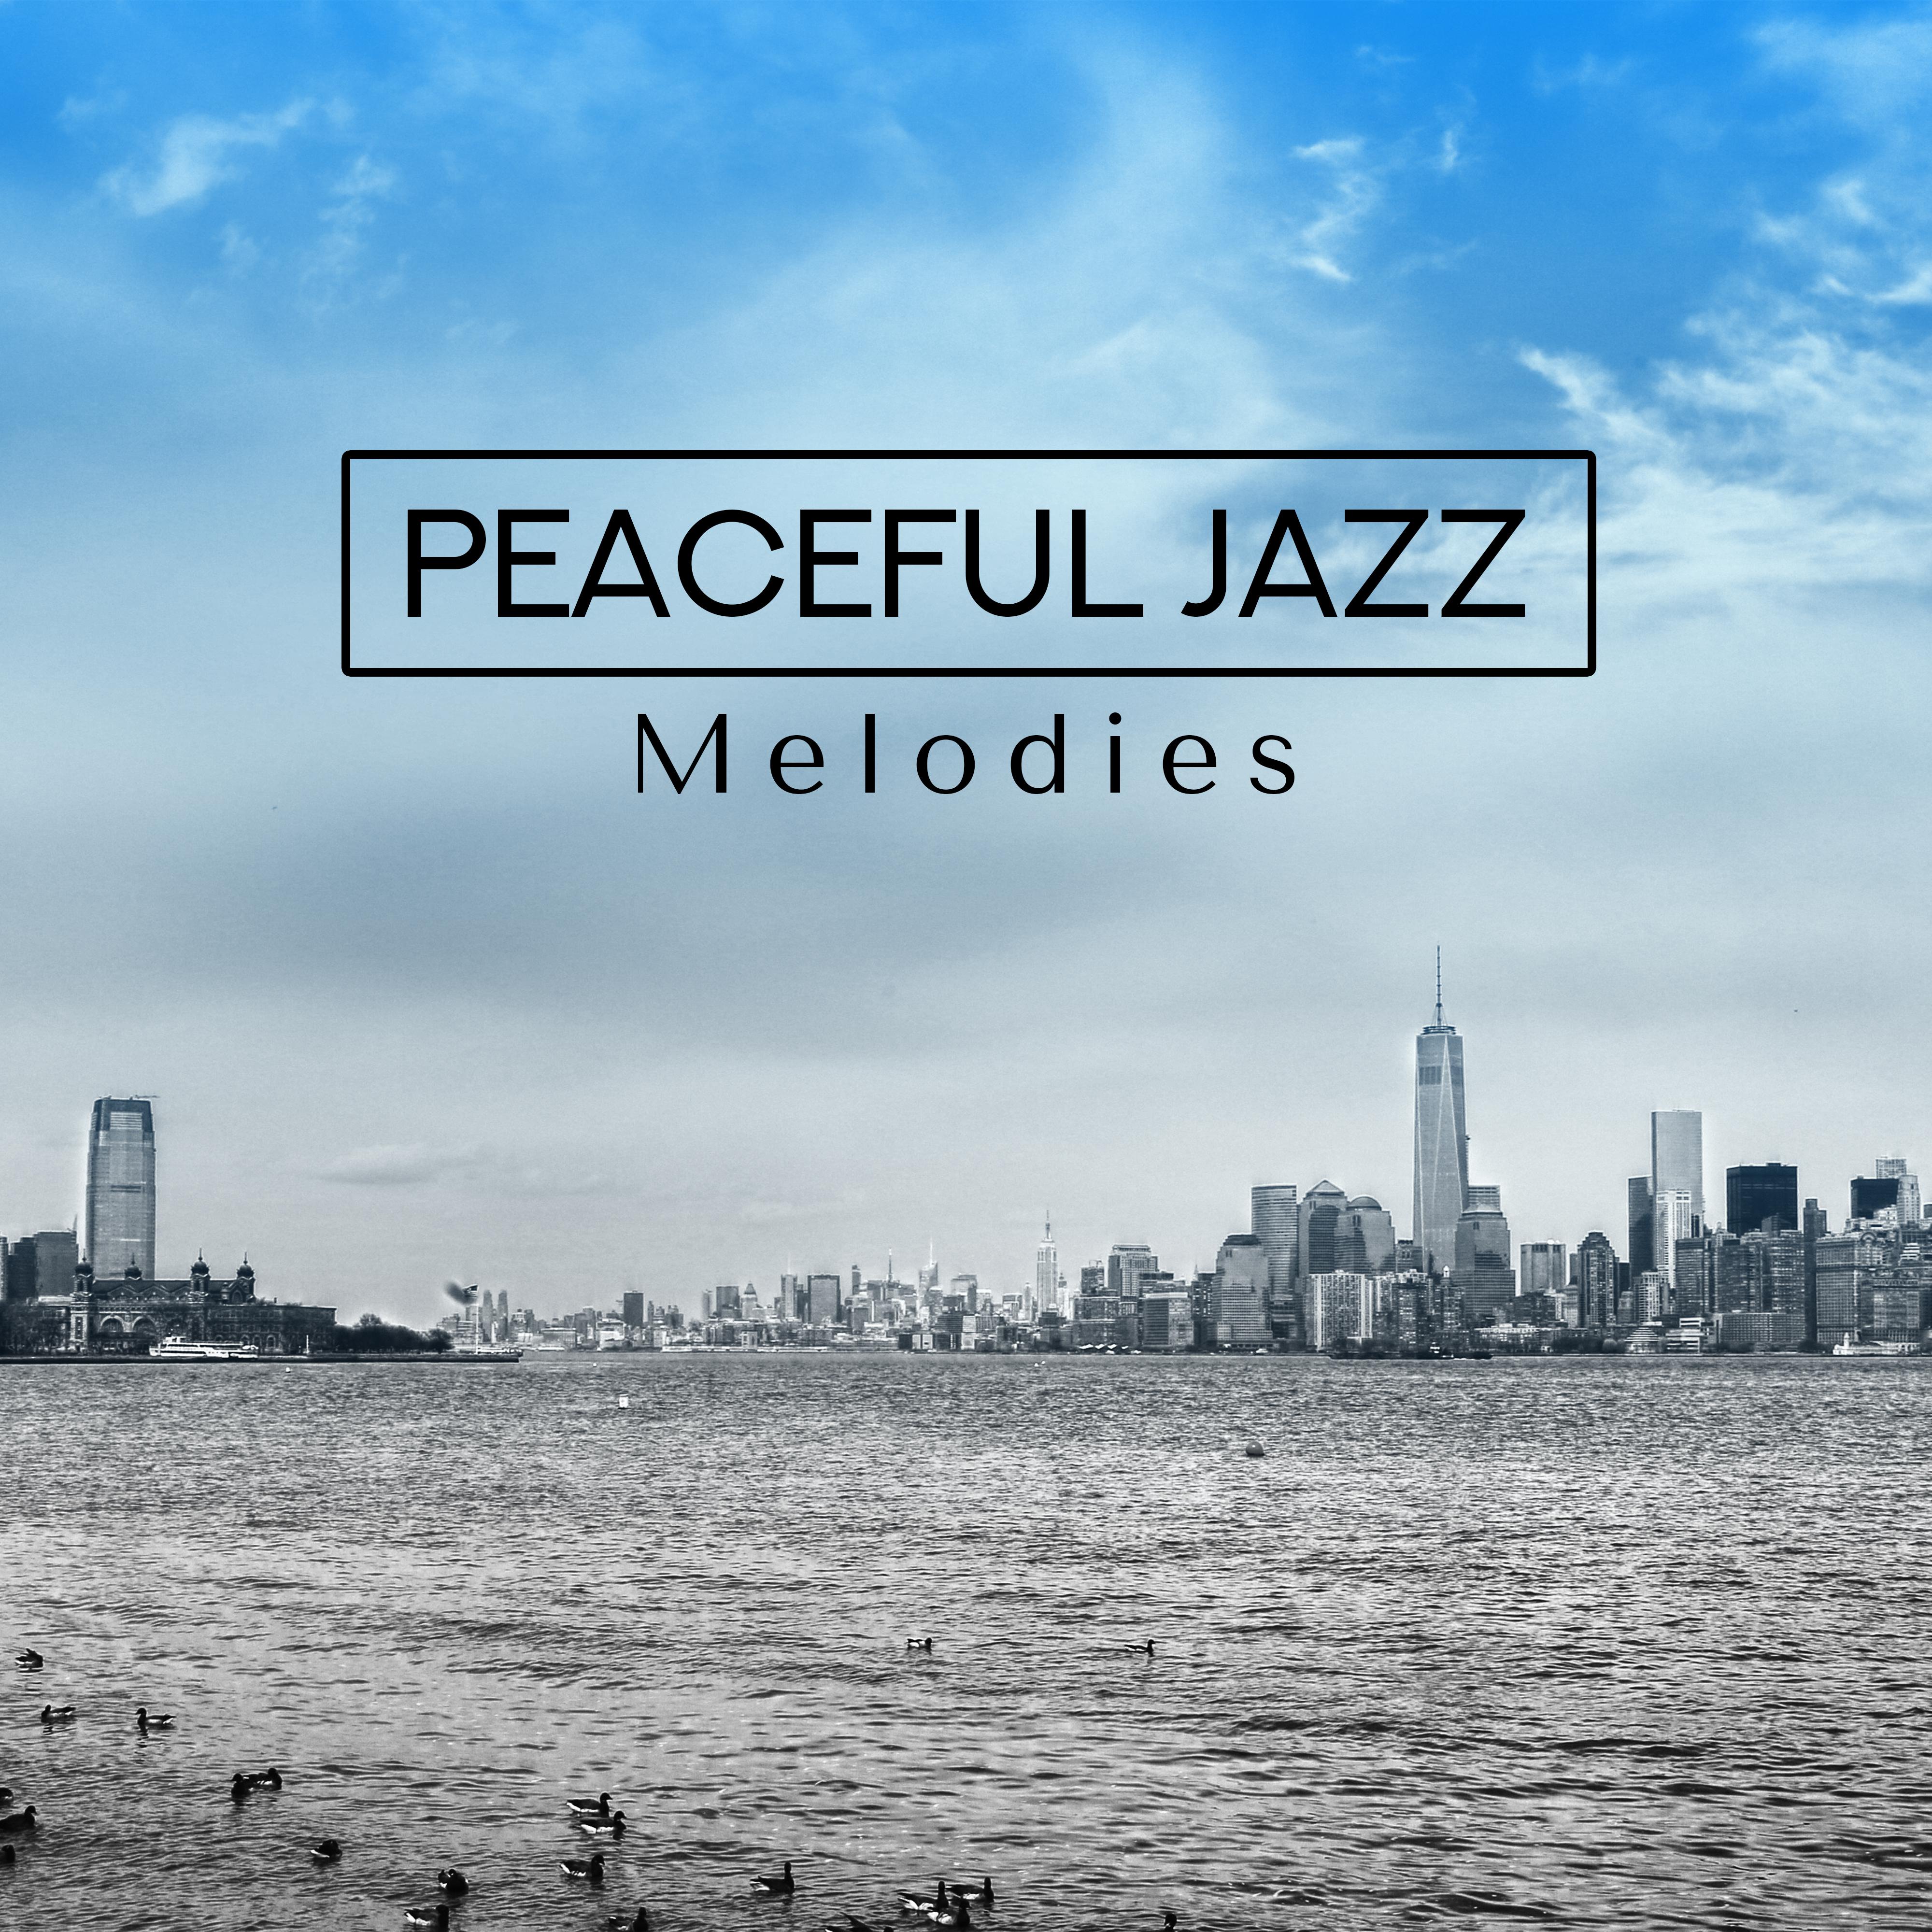 Peaceful Jazz Melodies  Calm Sounds to Relax, Evening Melodies to Rest, Jazz Music, Smooth Sounds